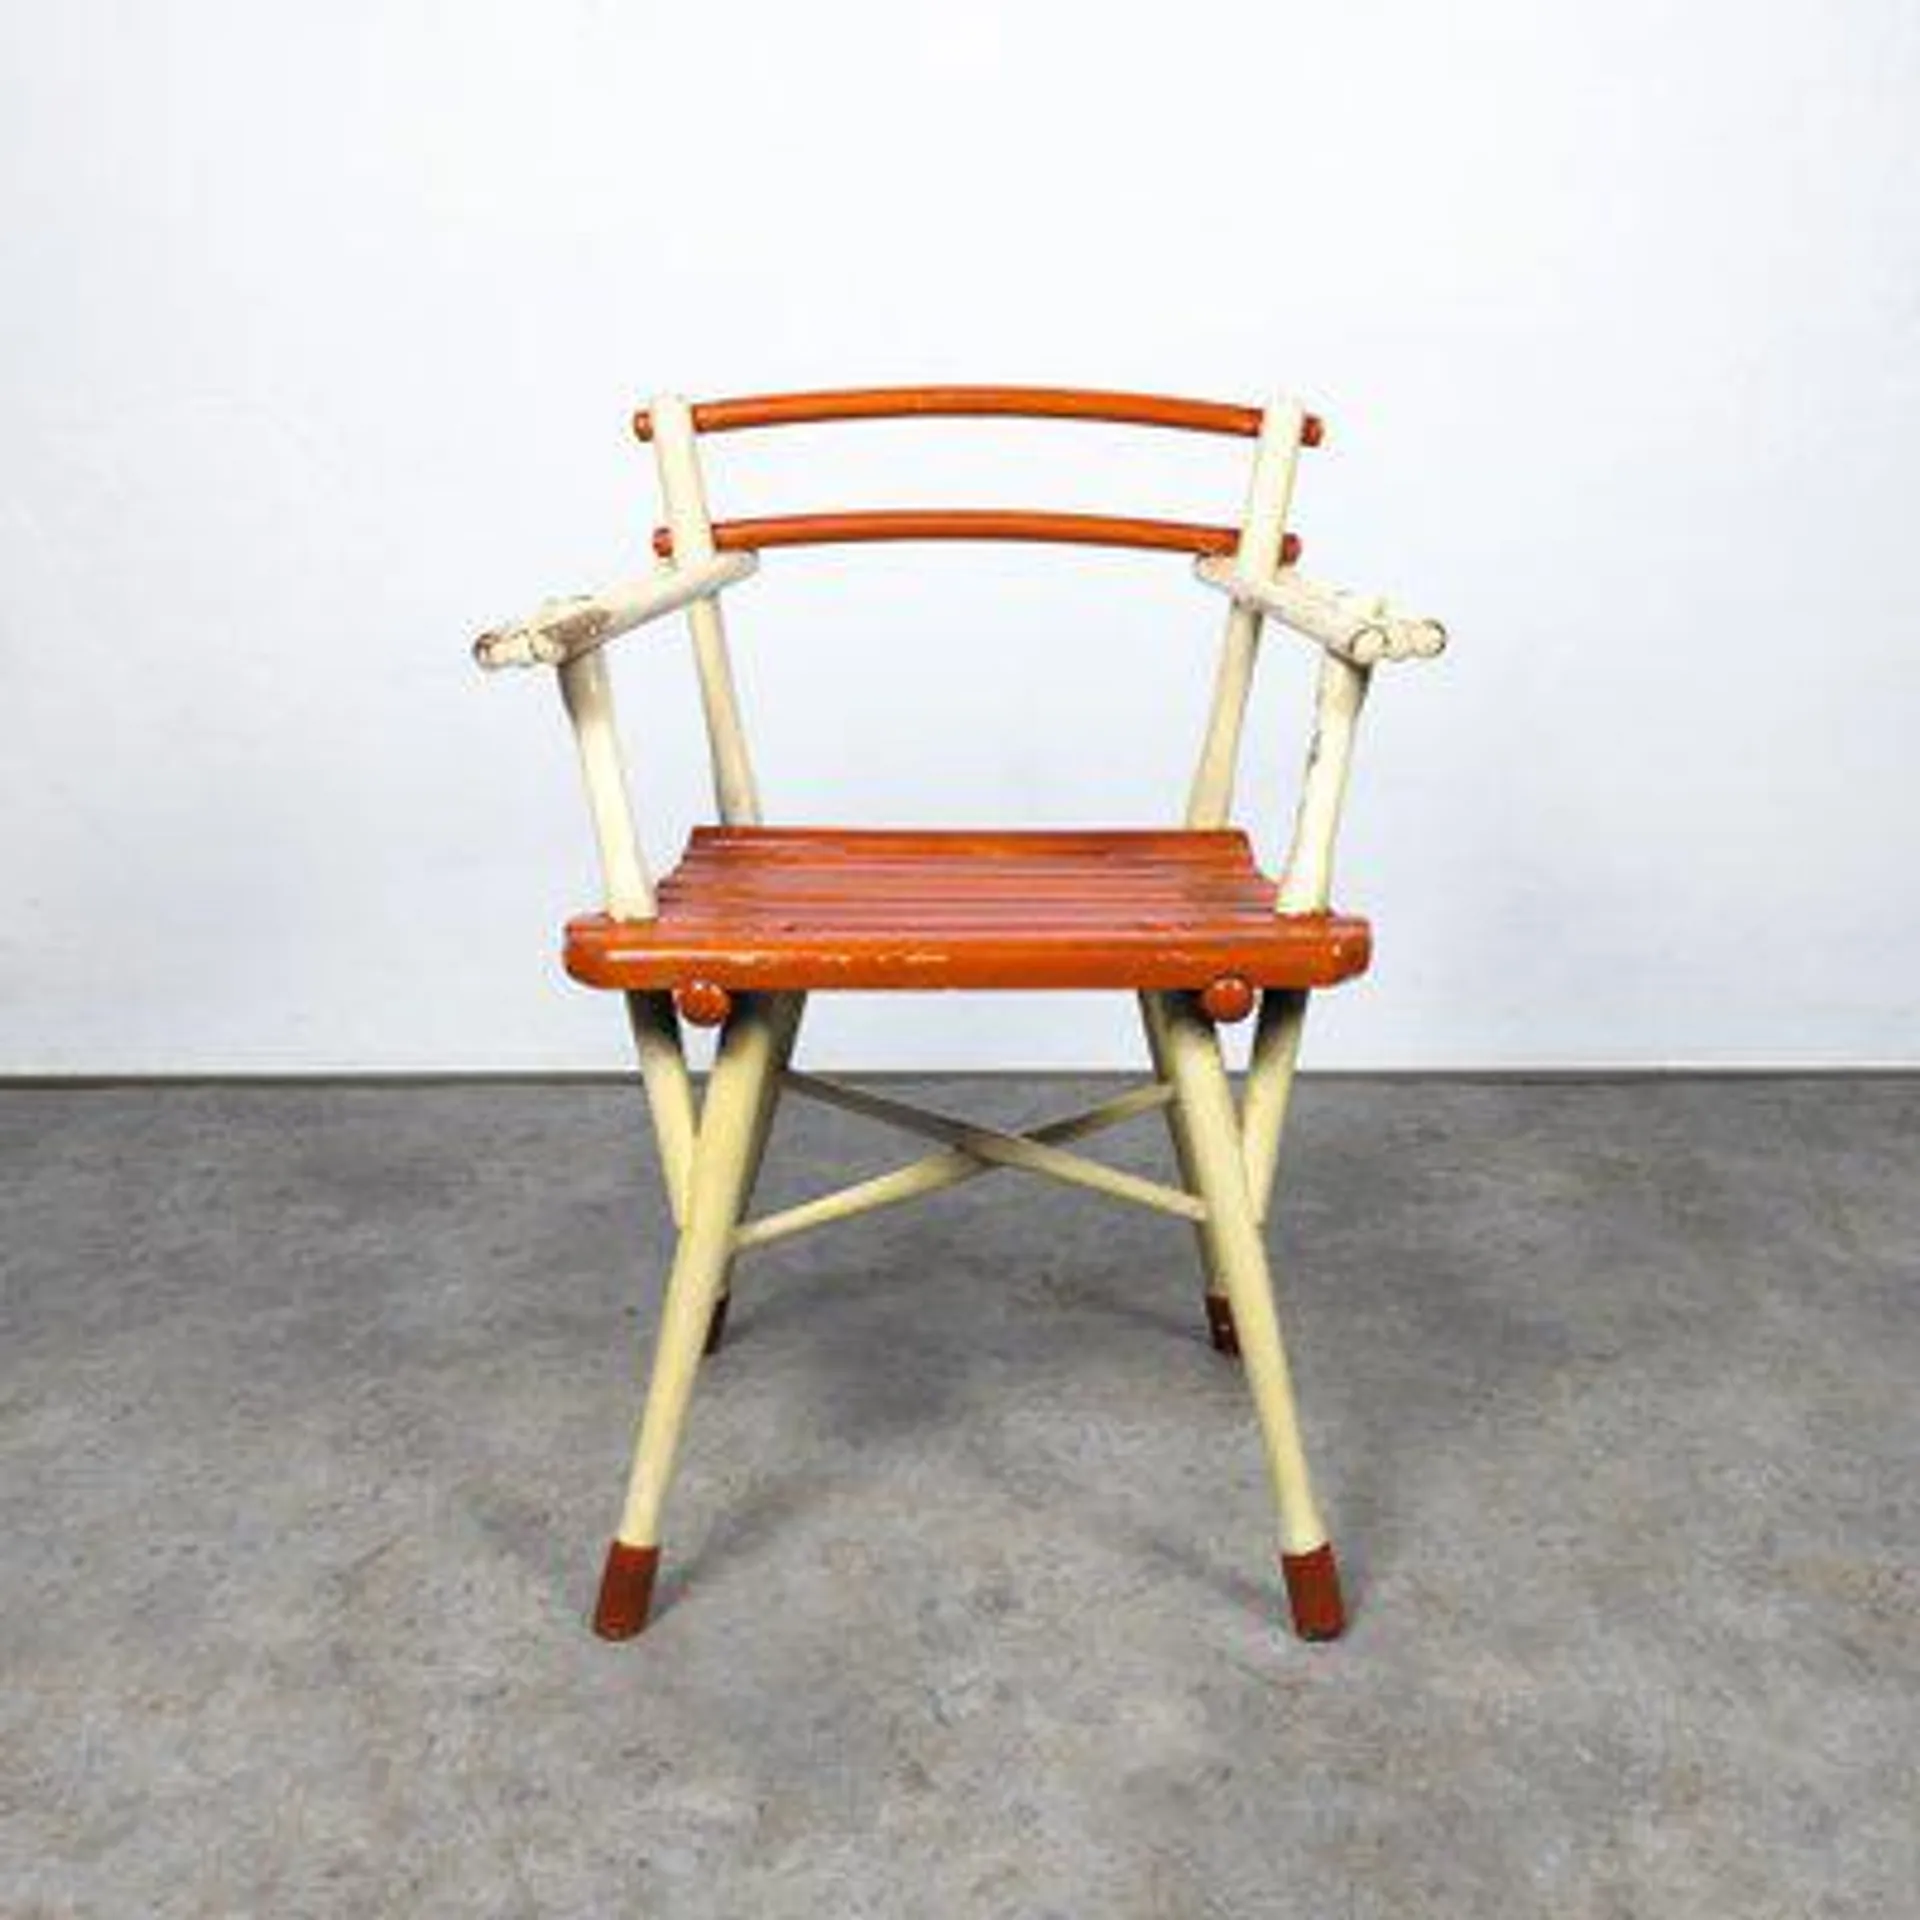 Vintage Zk24 Garden Chair by Michael Thonet for Thonet, 1930s